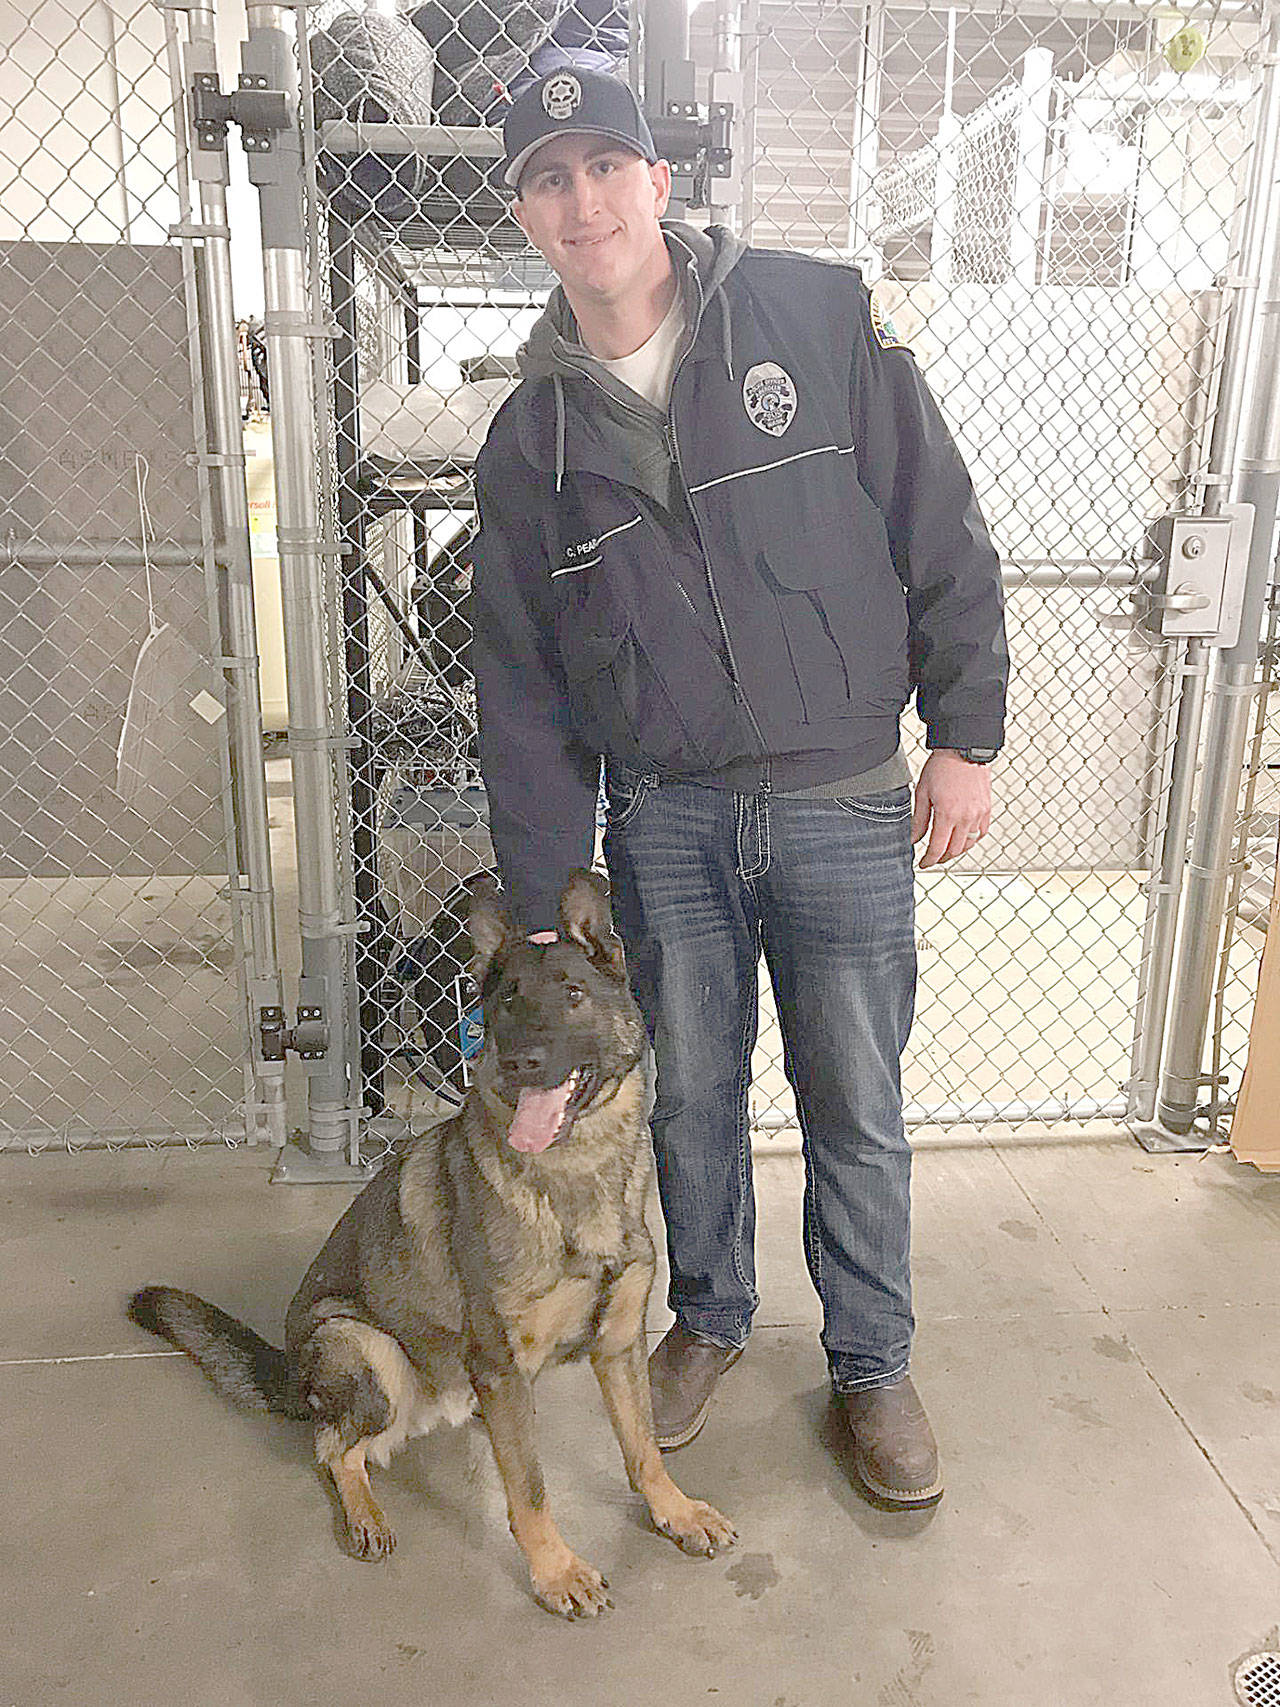 COURTESY ABERDEEN POLICE DEPARTMENT                                The Aberdeen Police Department has a new officer, K-9 in training Ronin, a 20-month-old German shepherd donated by a Tacoma animal rescue organization. Pictured is Ronin’s handler, officer Chad Pearsall, who was instrumental in acquiring a K-9, according to chief Steve Shumate.